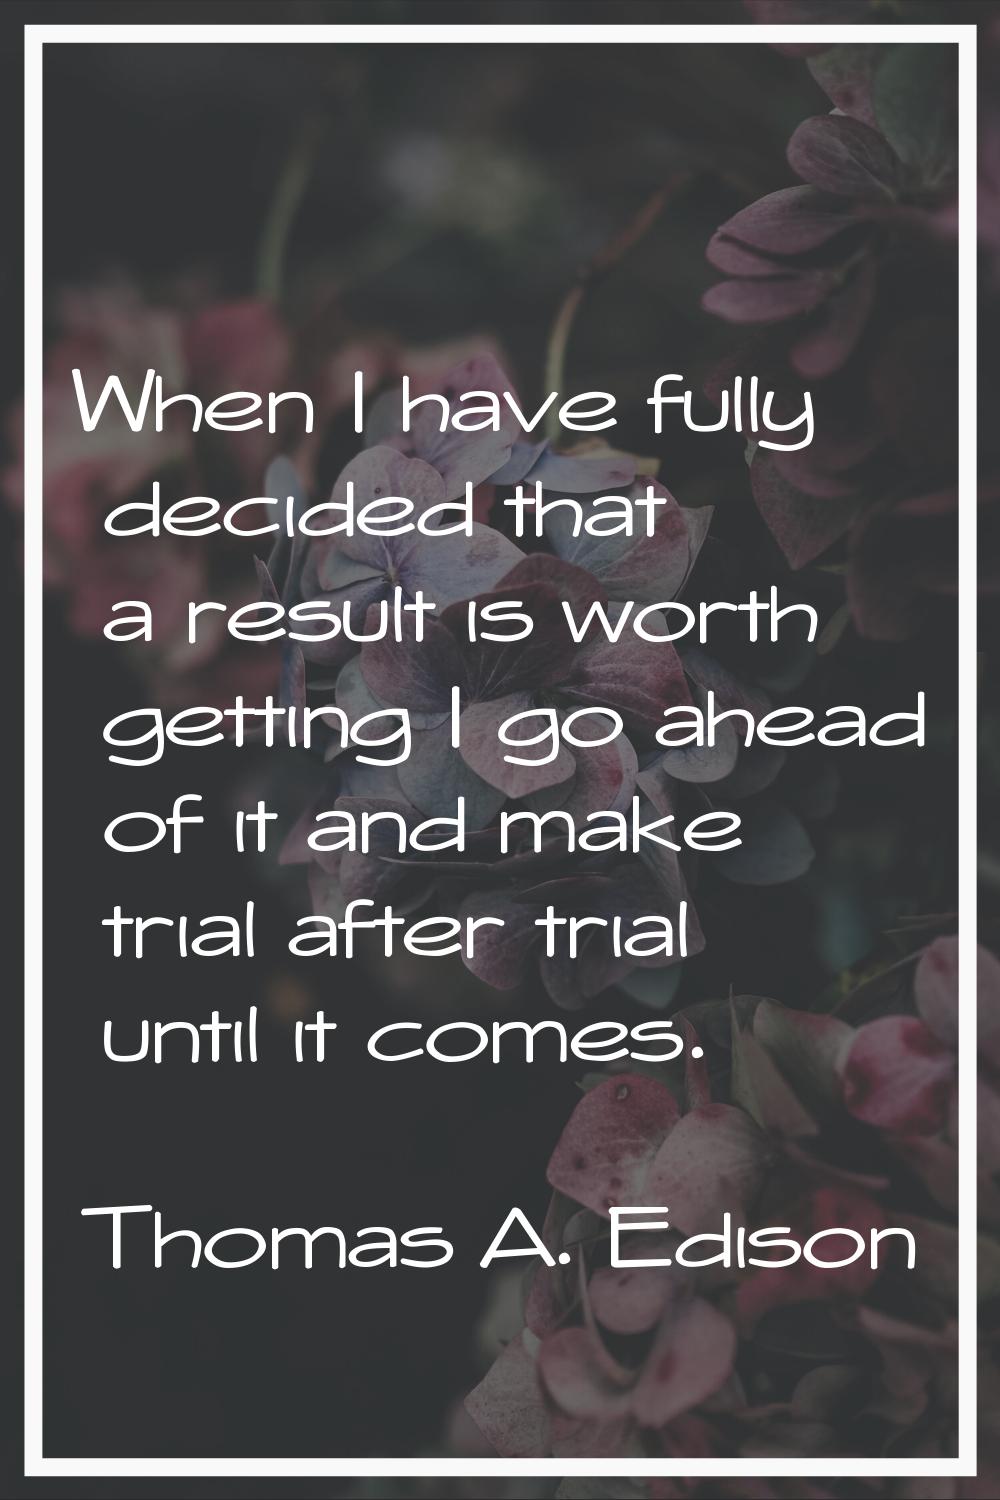 When I have fully decided that a result is worth getting I go ahead of it and make trial after tria